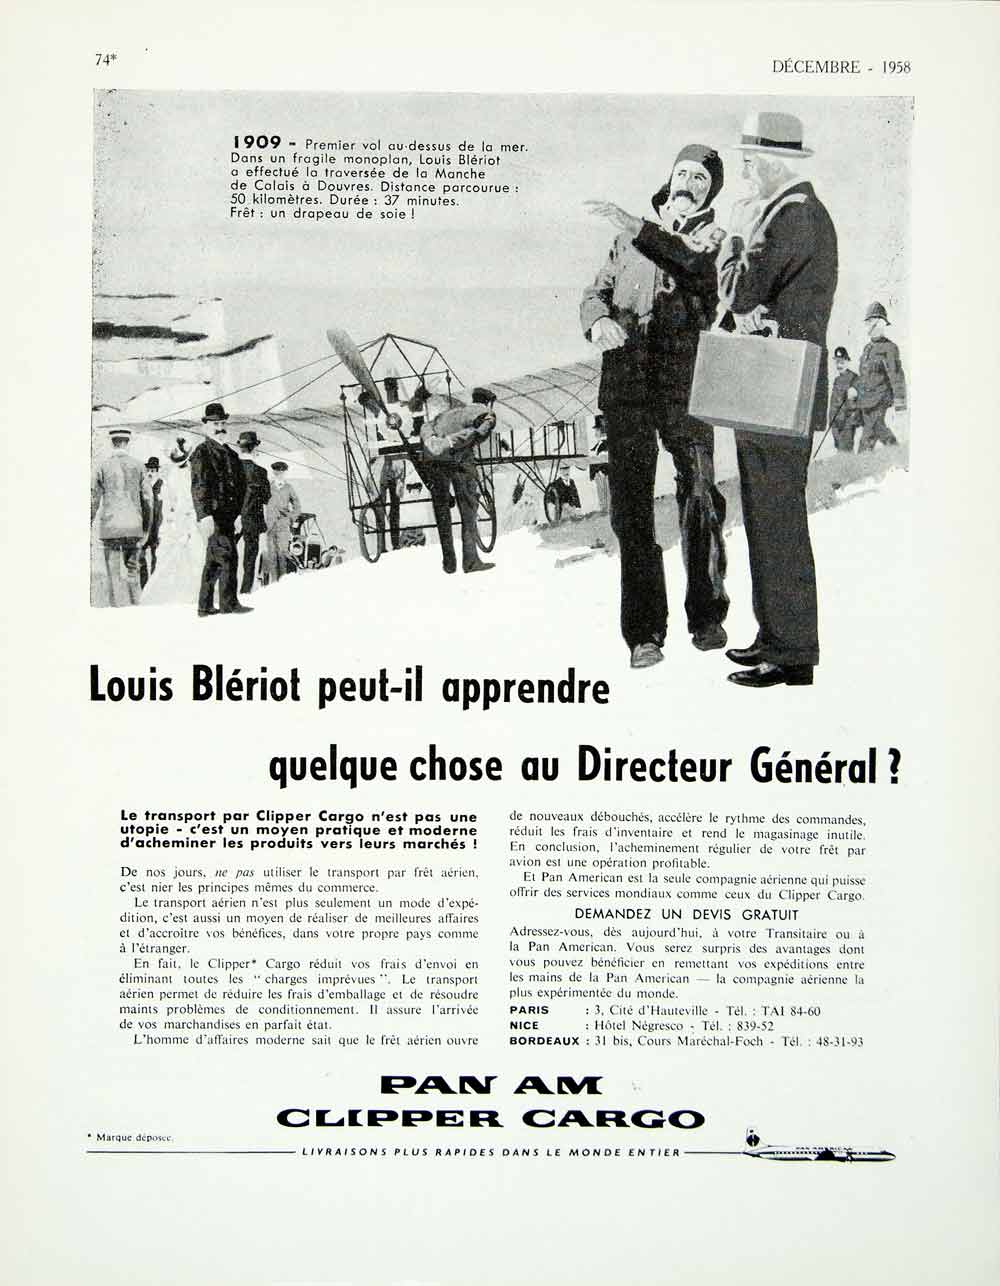 1958 Ad Vintage French Pan Am Clipper Cargo Airplane Aviator Louis Bleriot VENA1